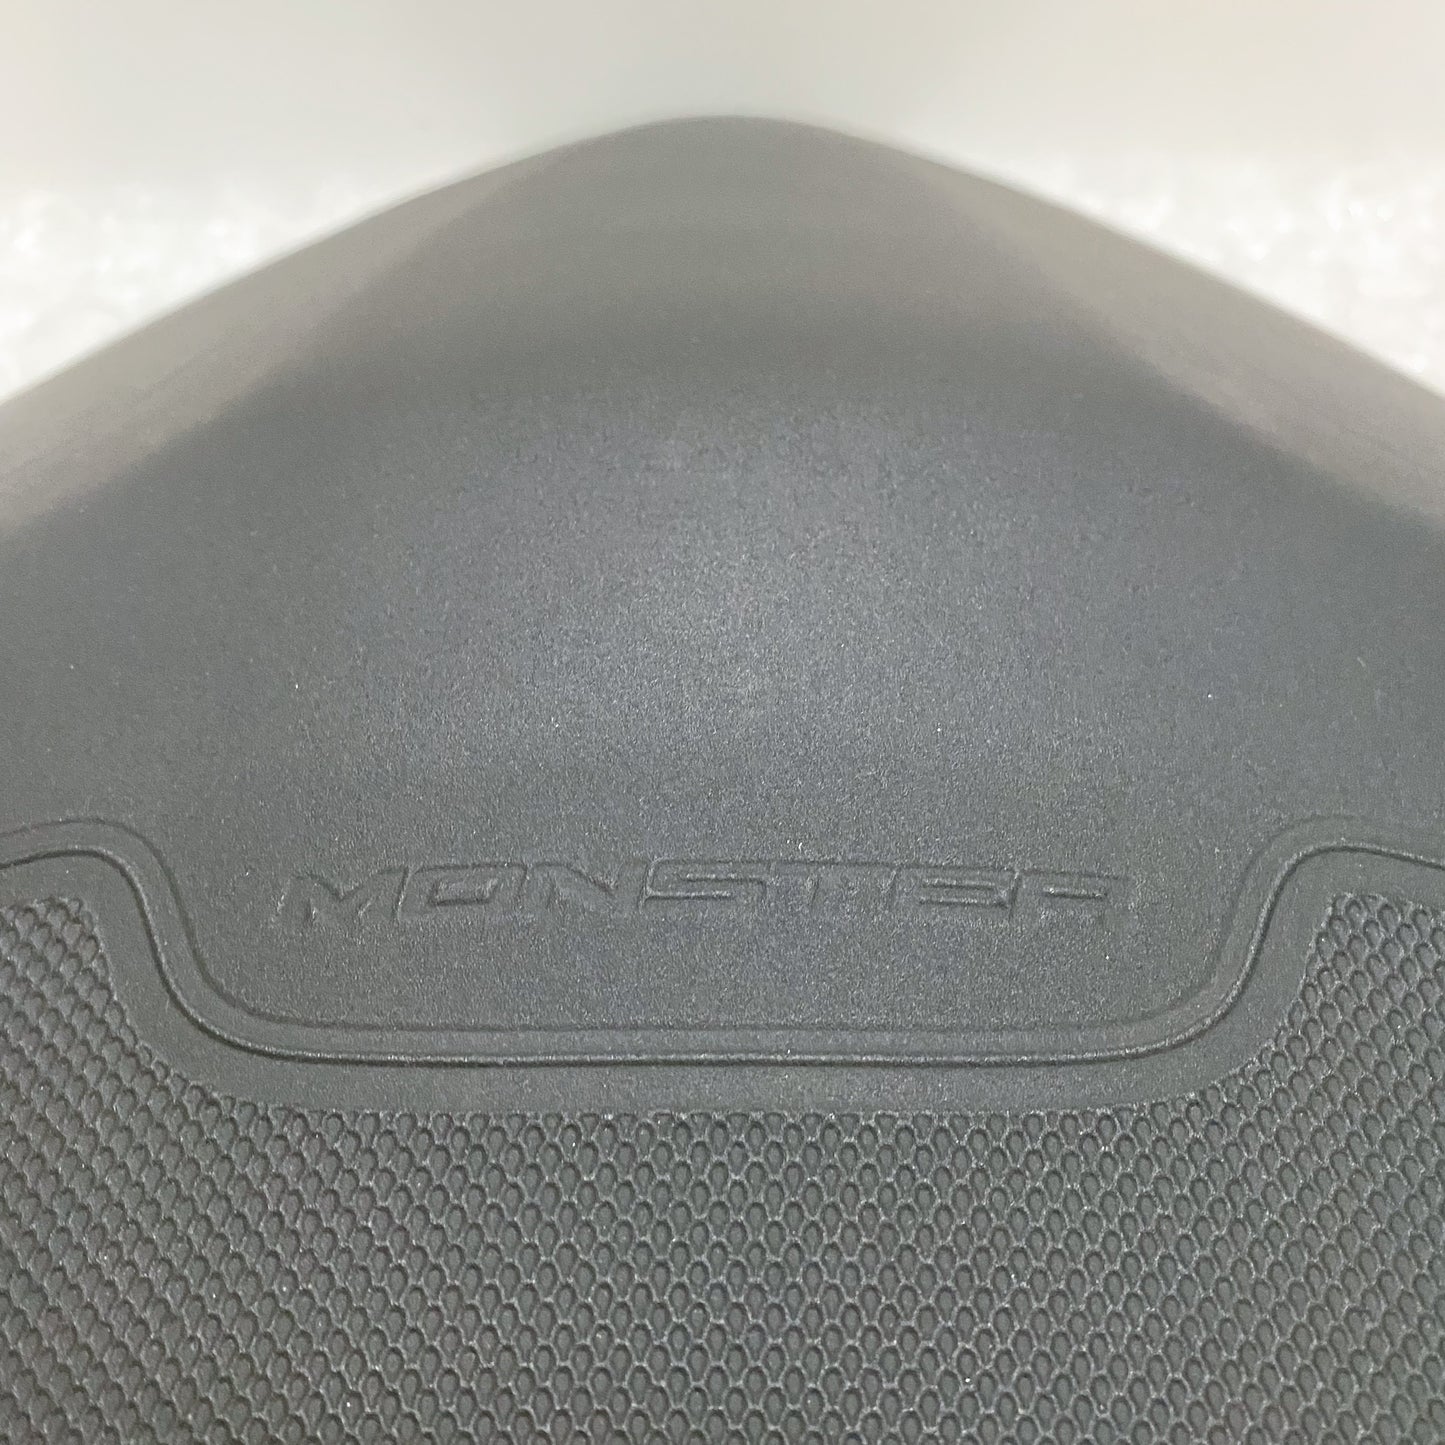 Ducati Monster 821 Stock Seat 59512401A USED